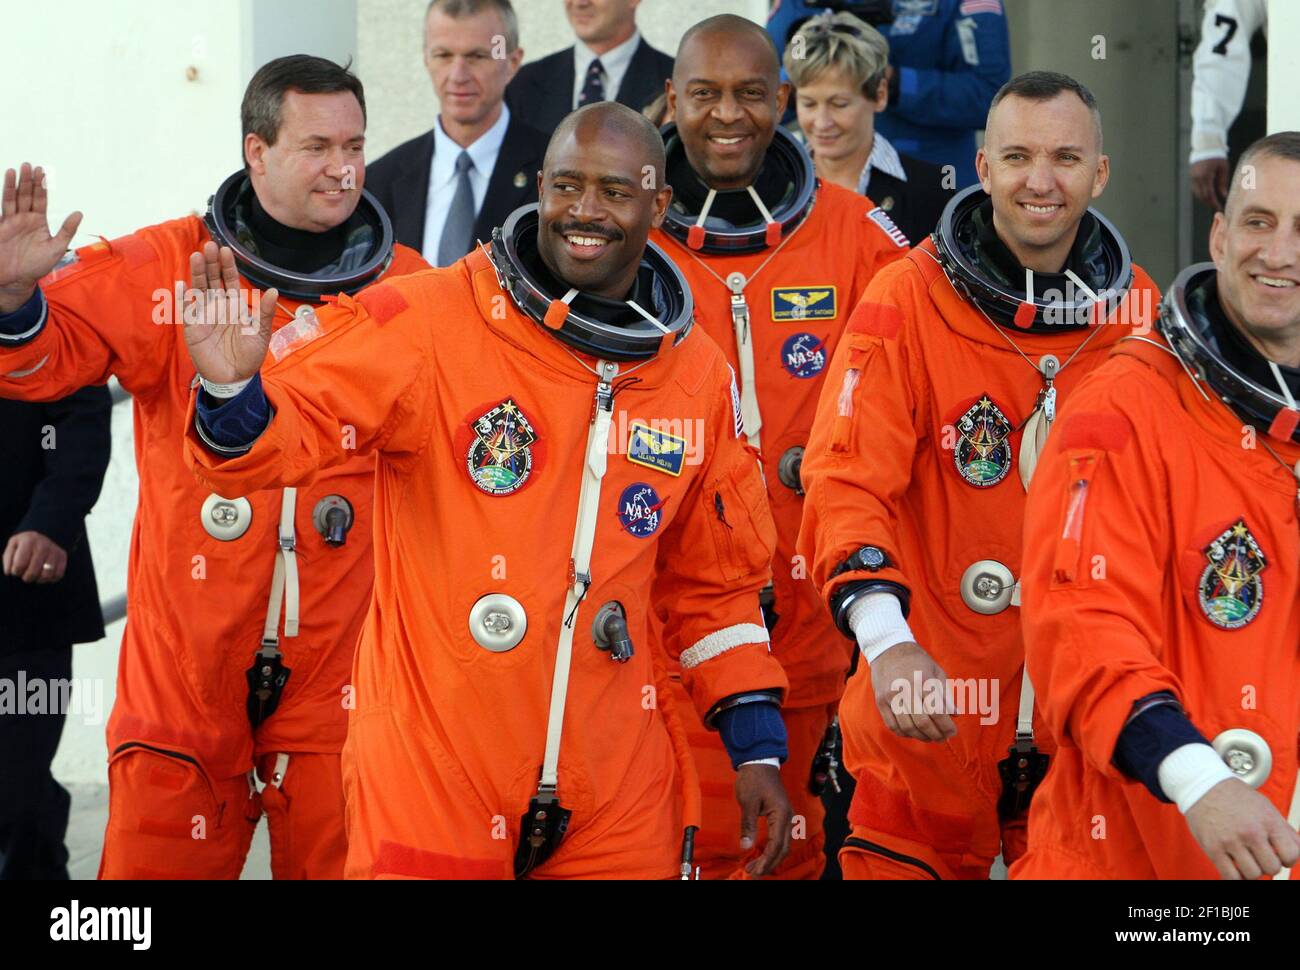 Space shuttle Atlantis astronaut Leland Melvin, second from left, waves as the crew of 6 head to climb aboard shuttle Atlantis at the Kennedy Space Center in Florida, Monday, November 16, 2009. (Photo by Red Huber/Orlando Sentinel/MCT/Sipa USA) Stock Photo